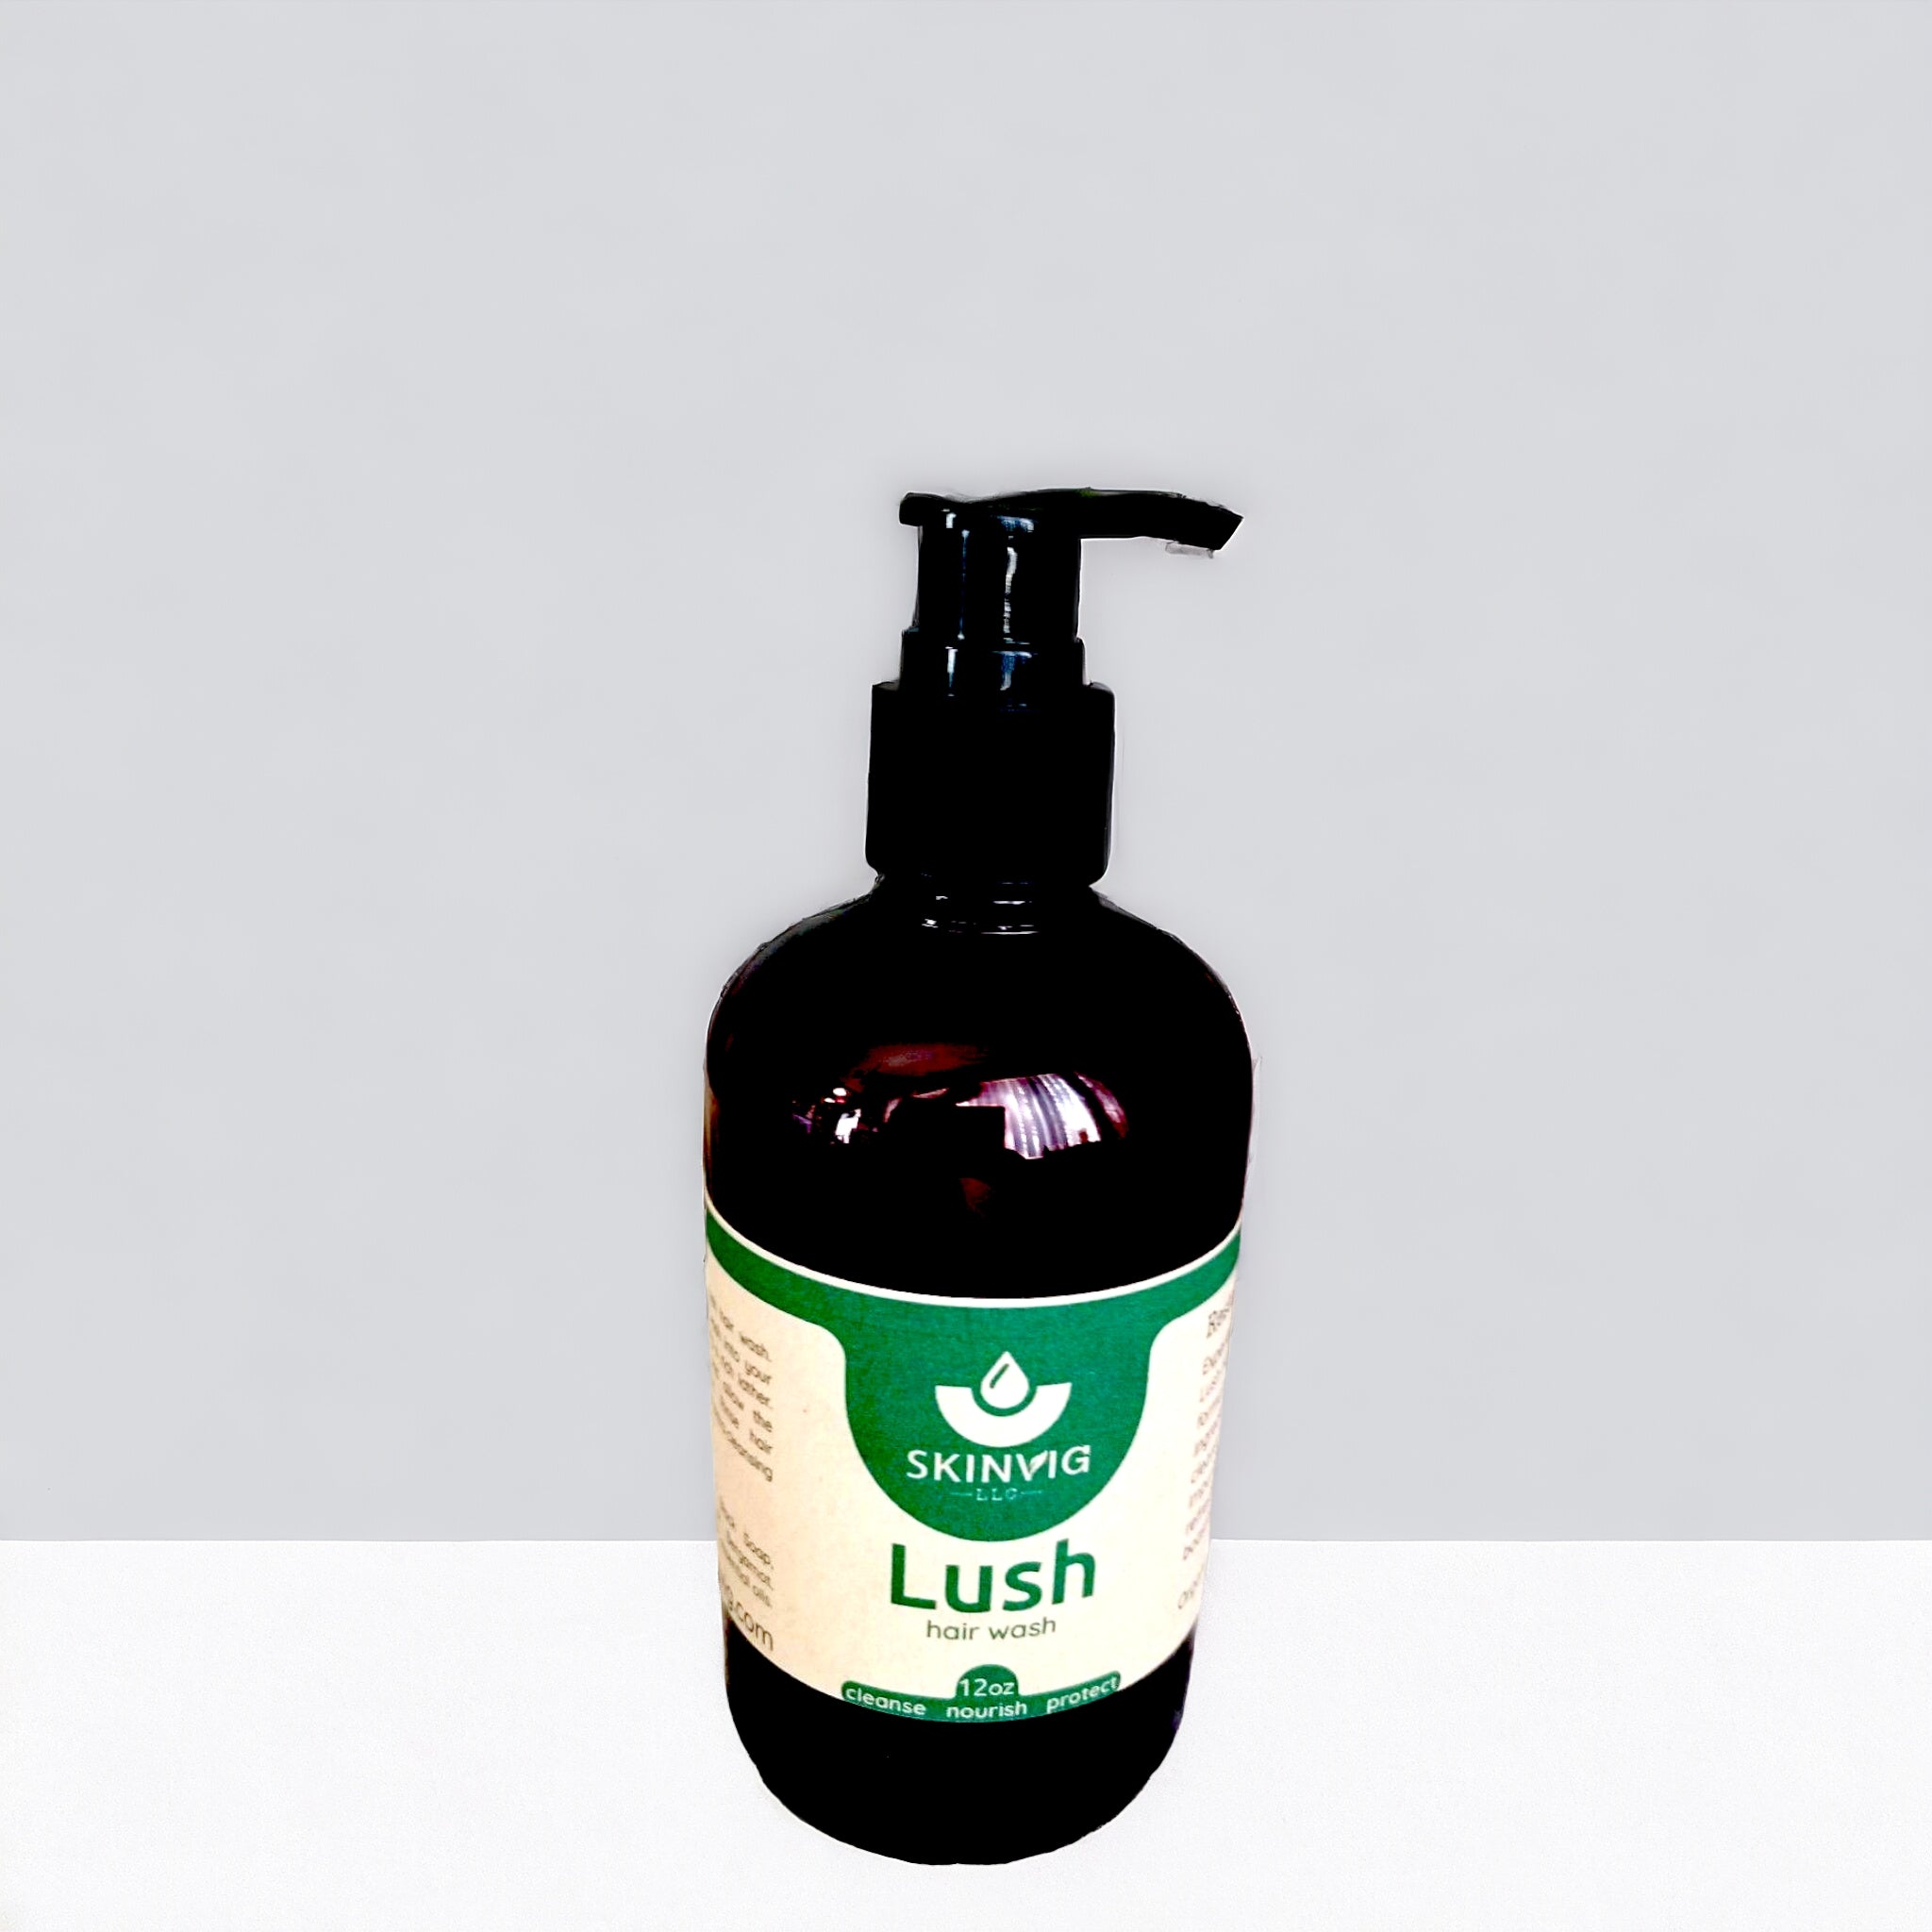 Experience the ultimate hair wash with our Lush Hair Wash. Our vegan and organic formula is designed to deeply cleanse, condition, soften, and detangle all hair types. Made with the powerful African black soap, expect effective and raw results. Transform your hair routine with Lush Hair Wash.